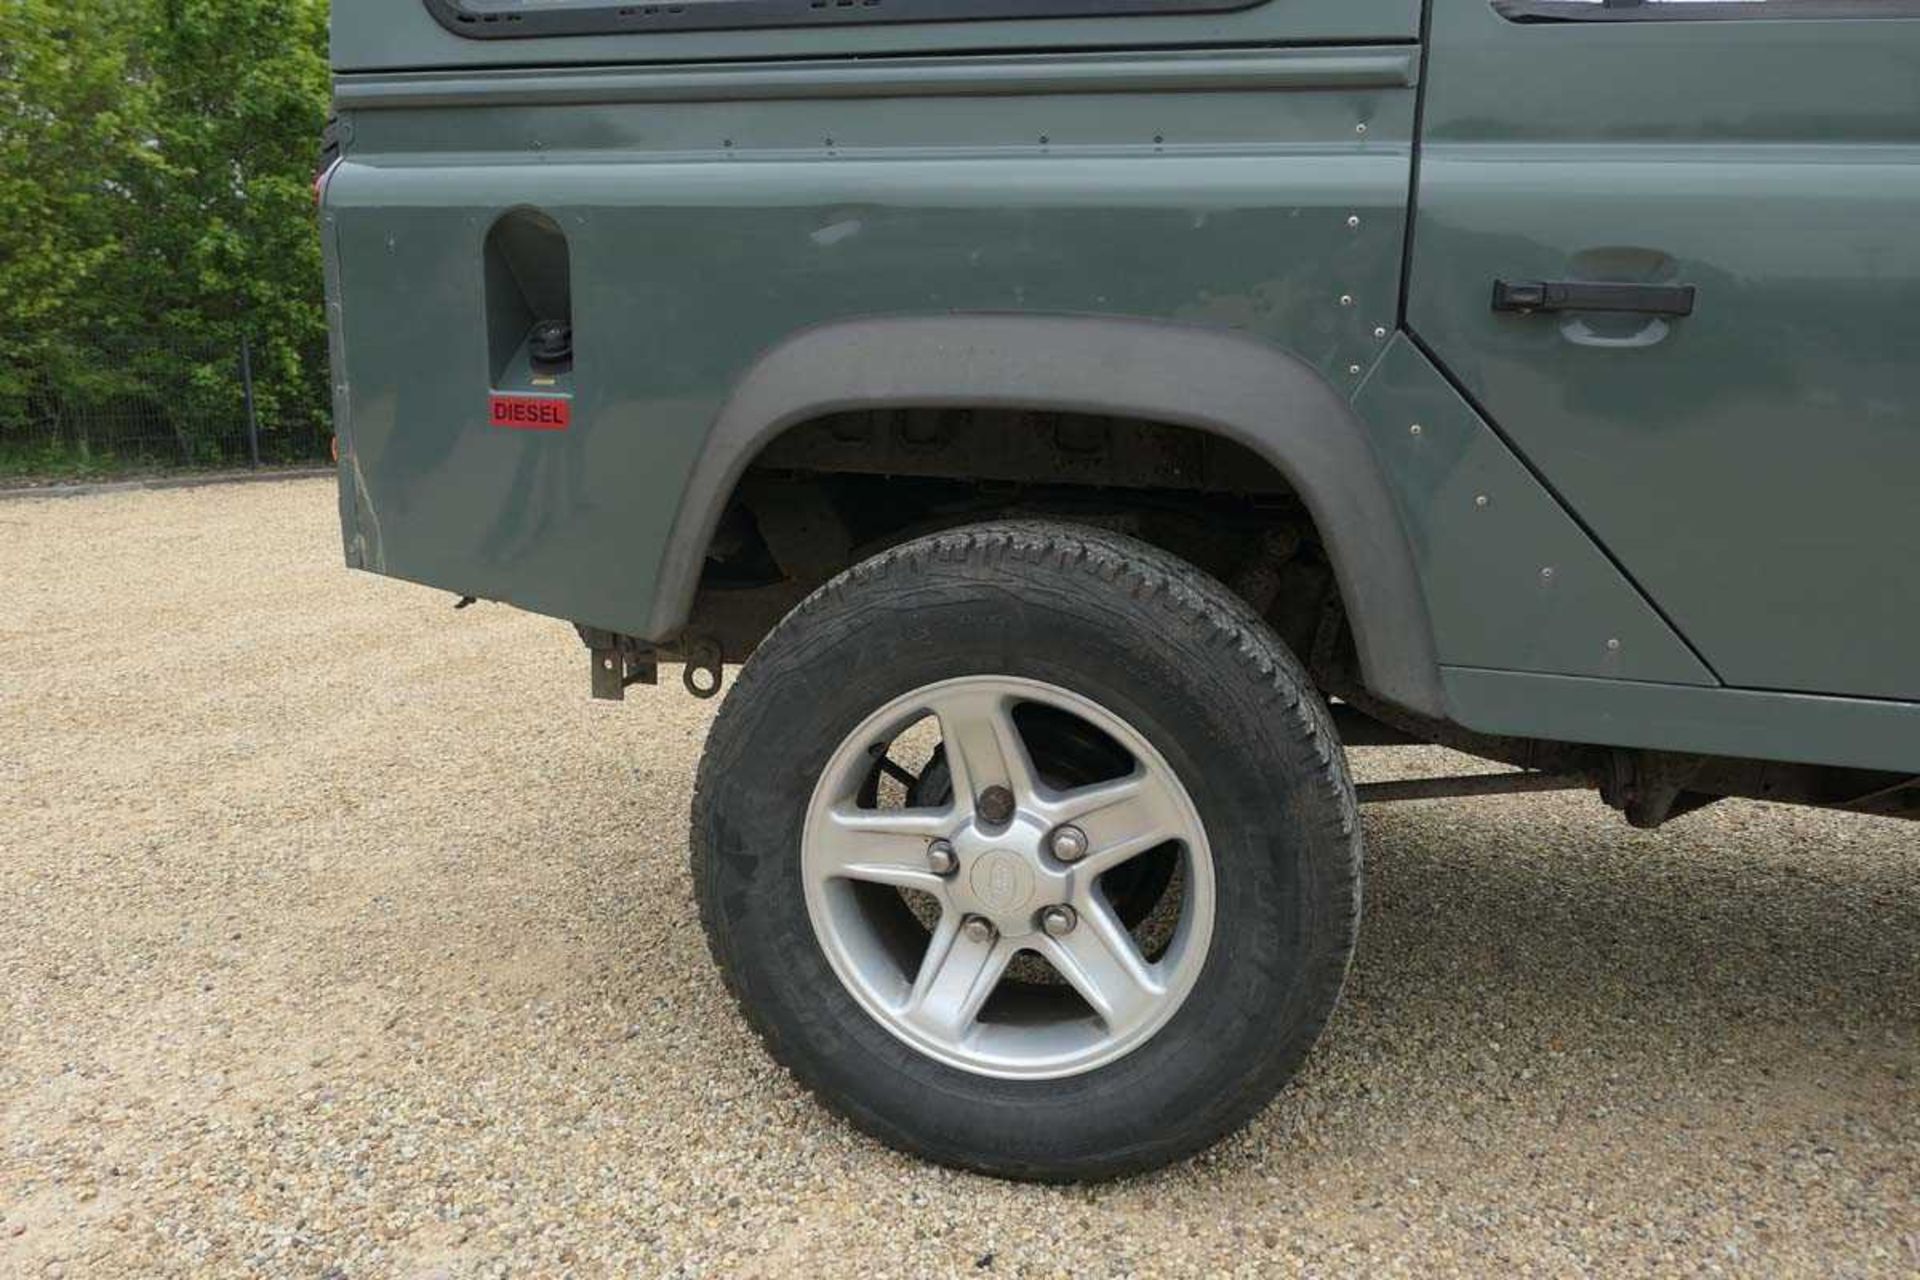 (LD58 NLV) 2008 Land Rover Defender 110 LWB station wagon estate in green, 2402cc diesel, 6-speed - Image 10 of 20